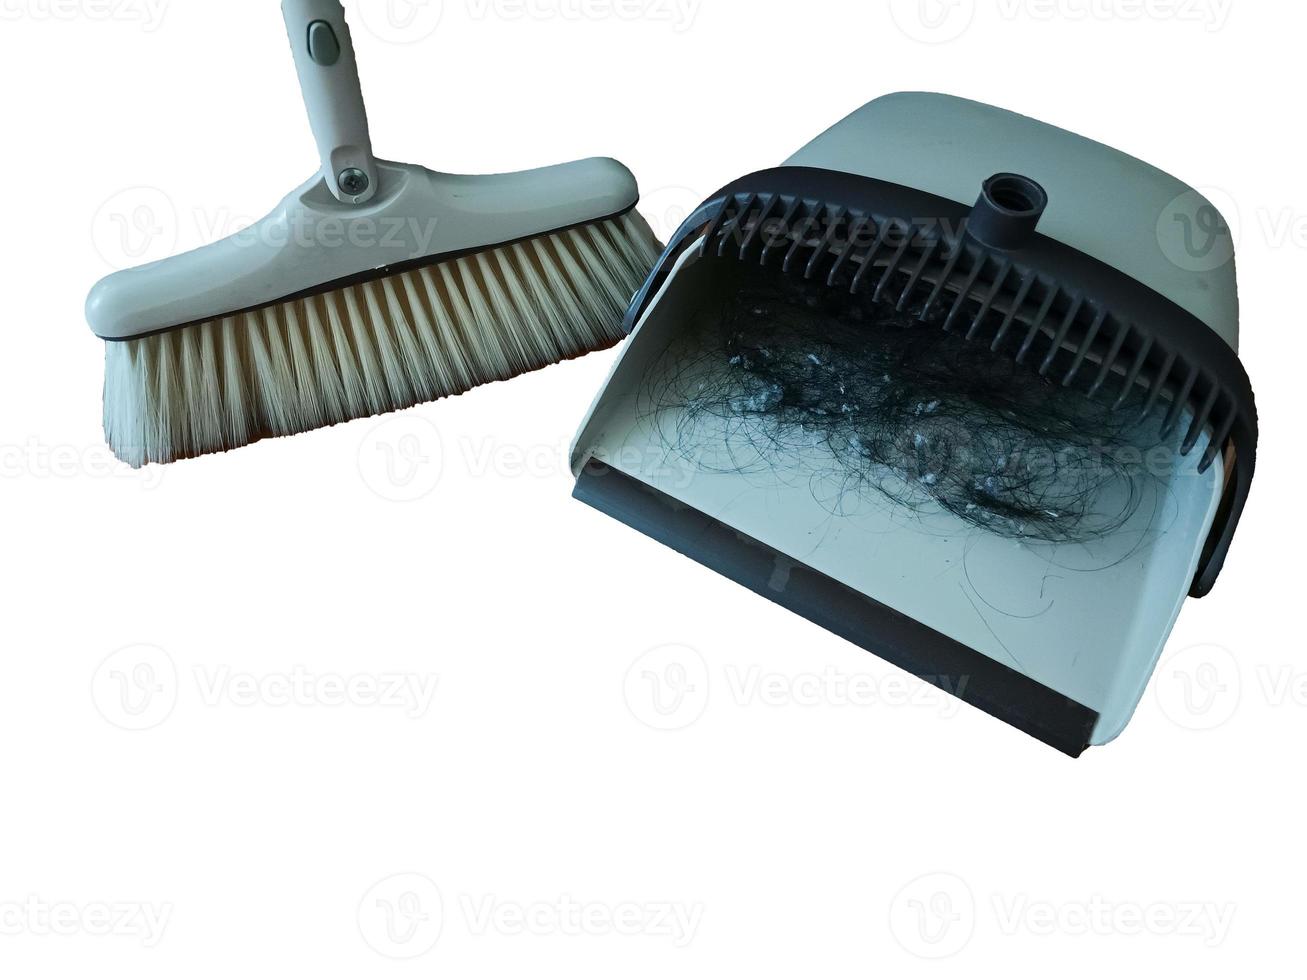 Sweeping Dust With A Broom On A Dustpan, Housekeeping Concept on white background. photo